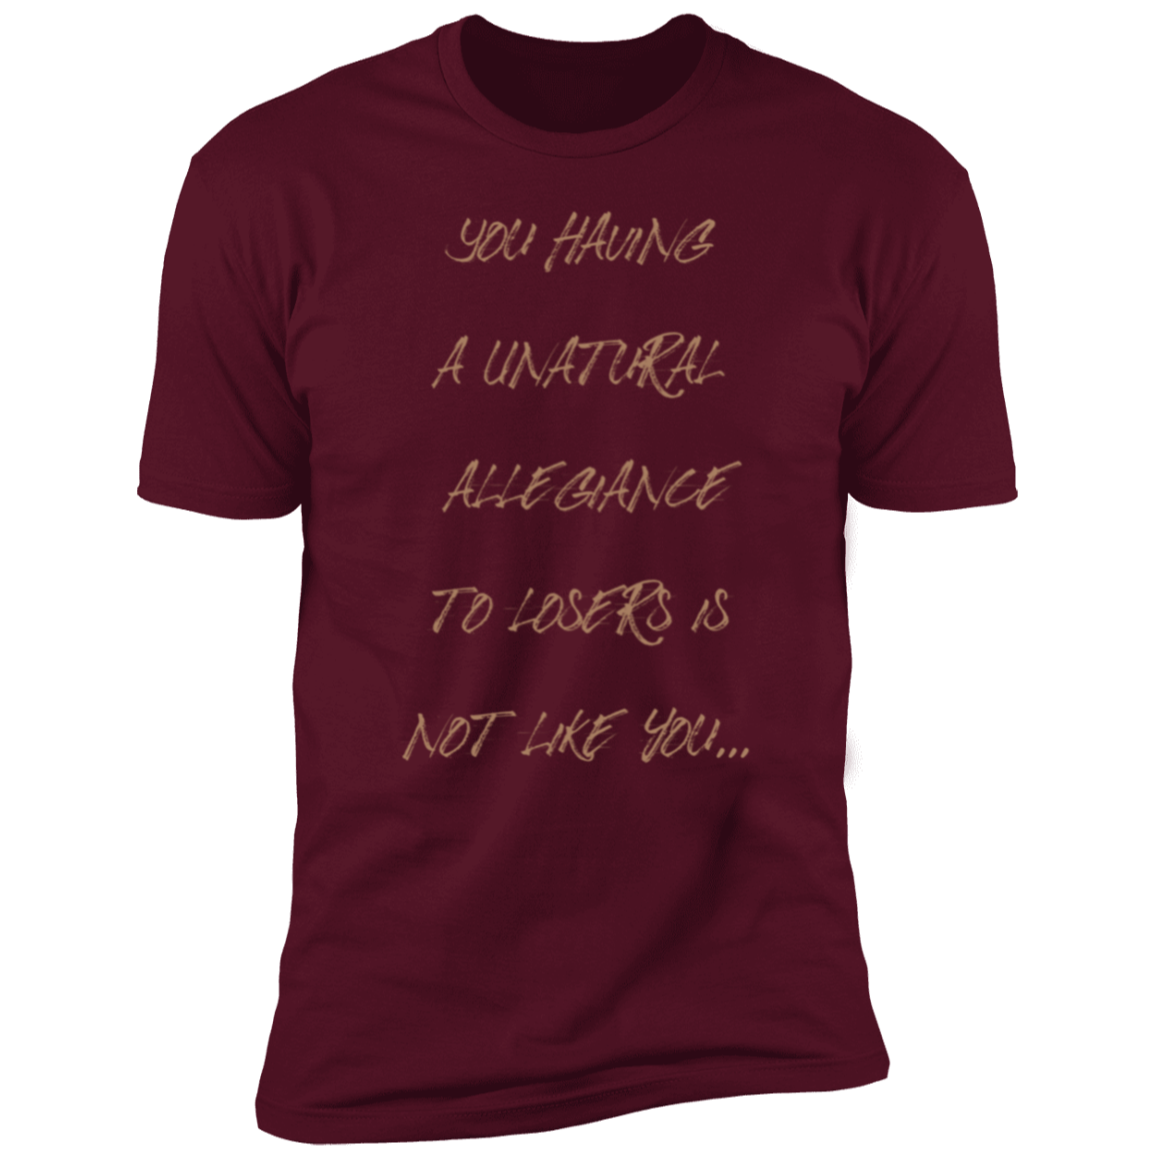 You having a unatural allegiance to losers is not like you… Premium Short Sleeve T-Shirt